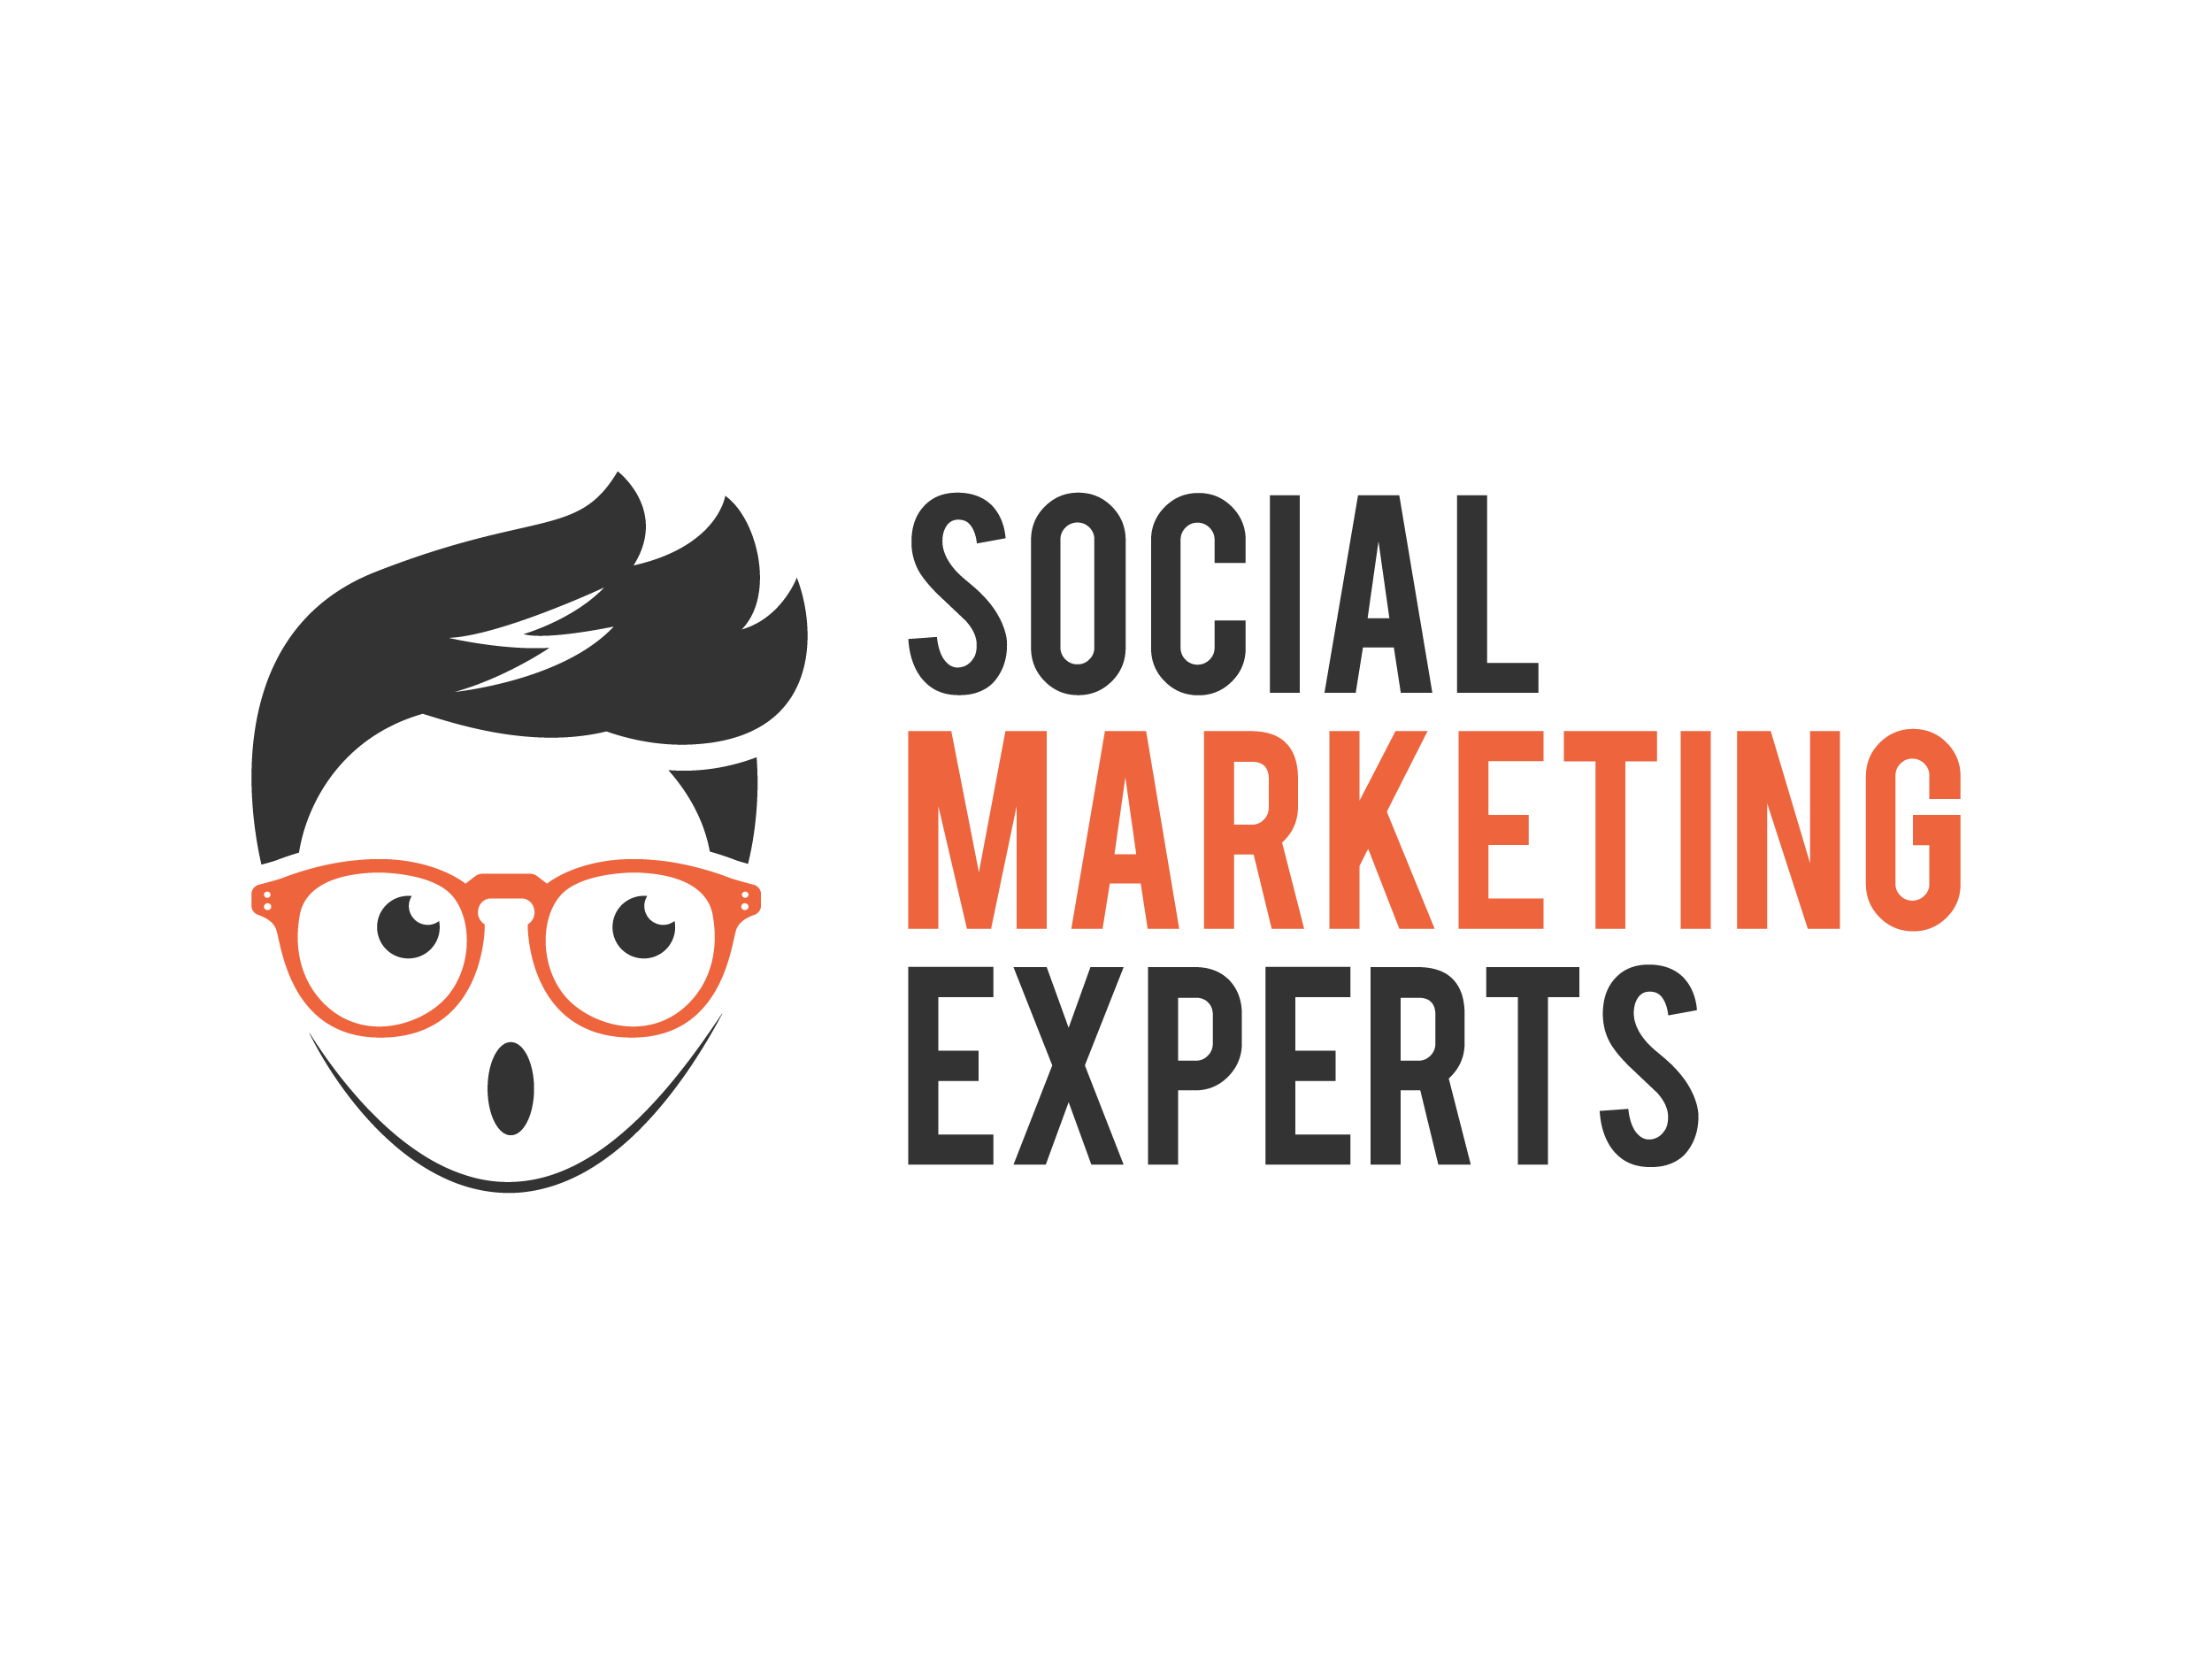 Social Marketing Experts profile on Qualified.One